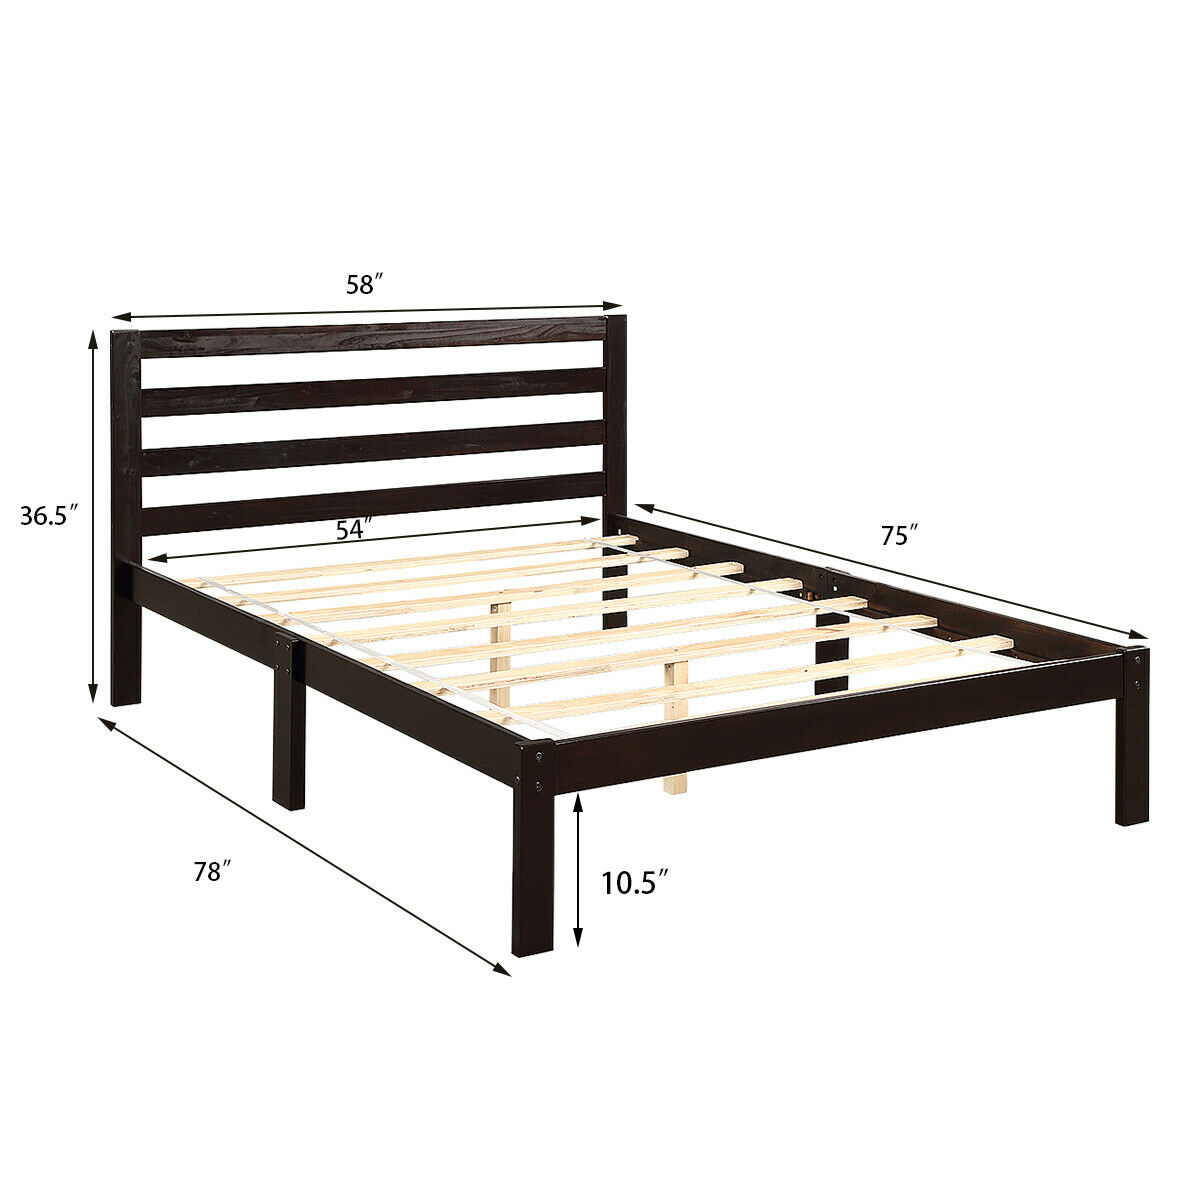 Gymax Solid Wood Platform Bed W, What Is The Measurements Of A Full Size Bed Frame